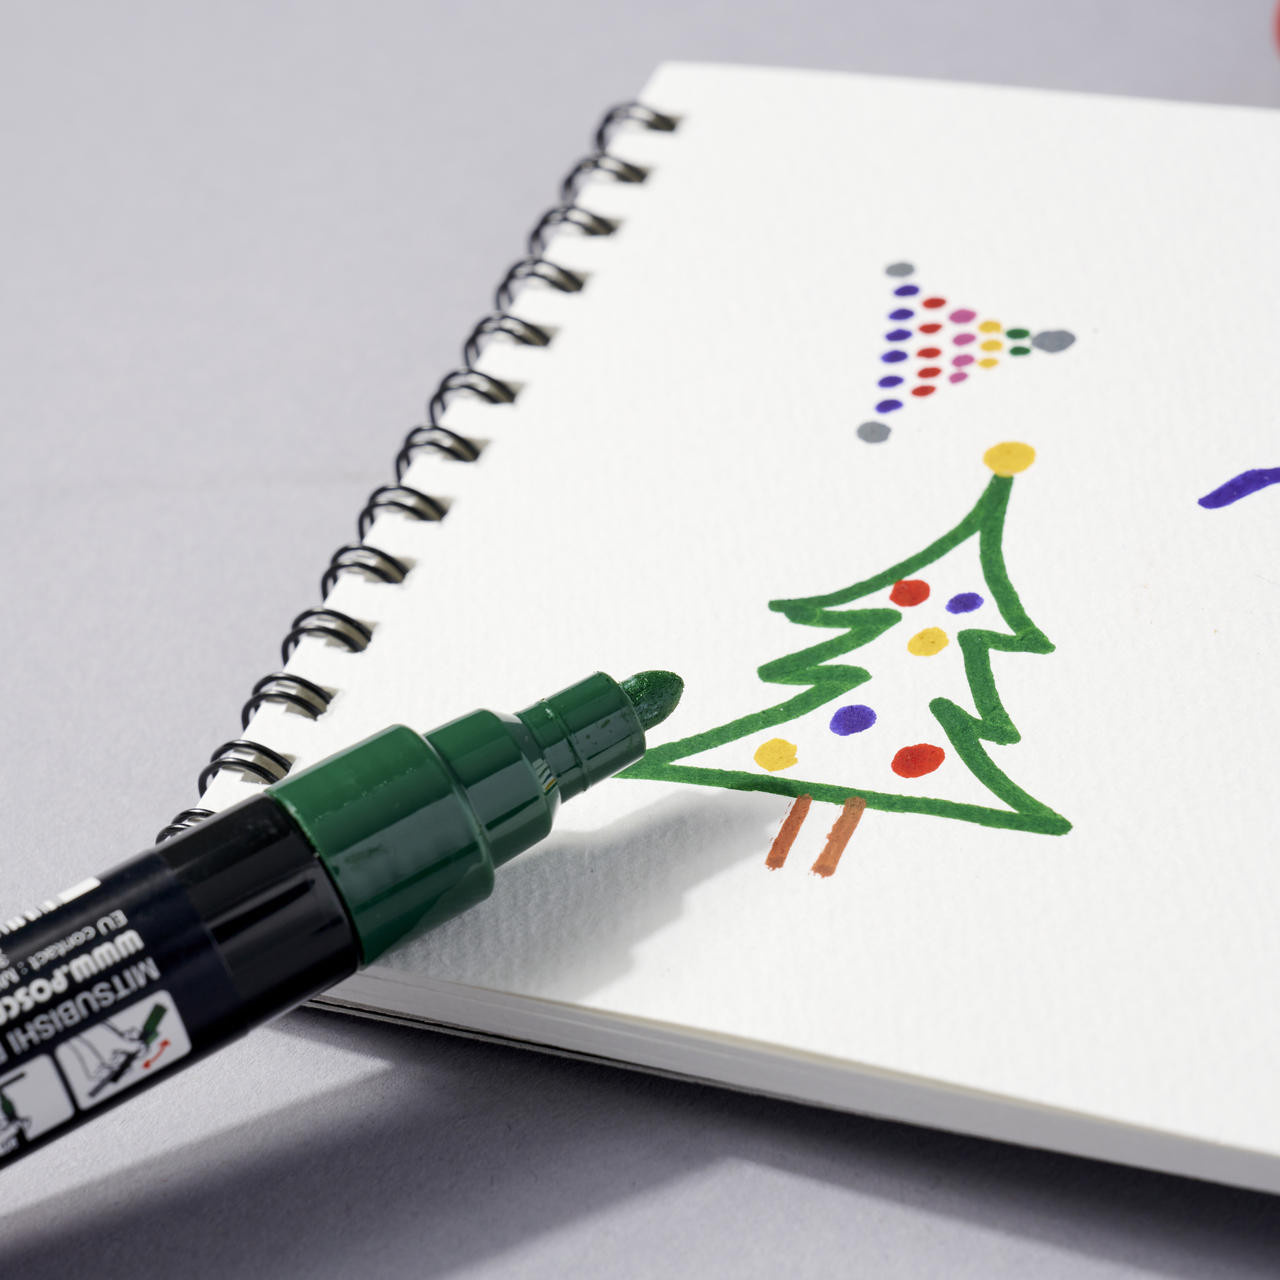 Posca Markers for Beginners: Everything You Need to Know to Use